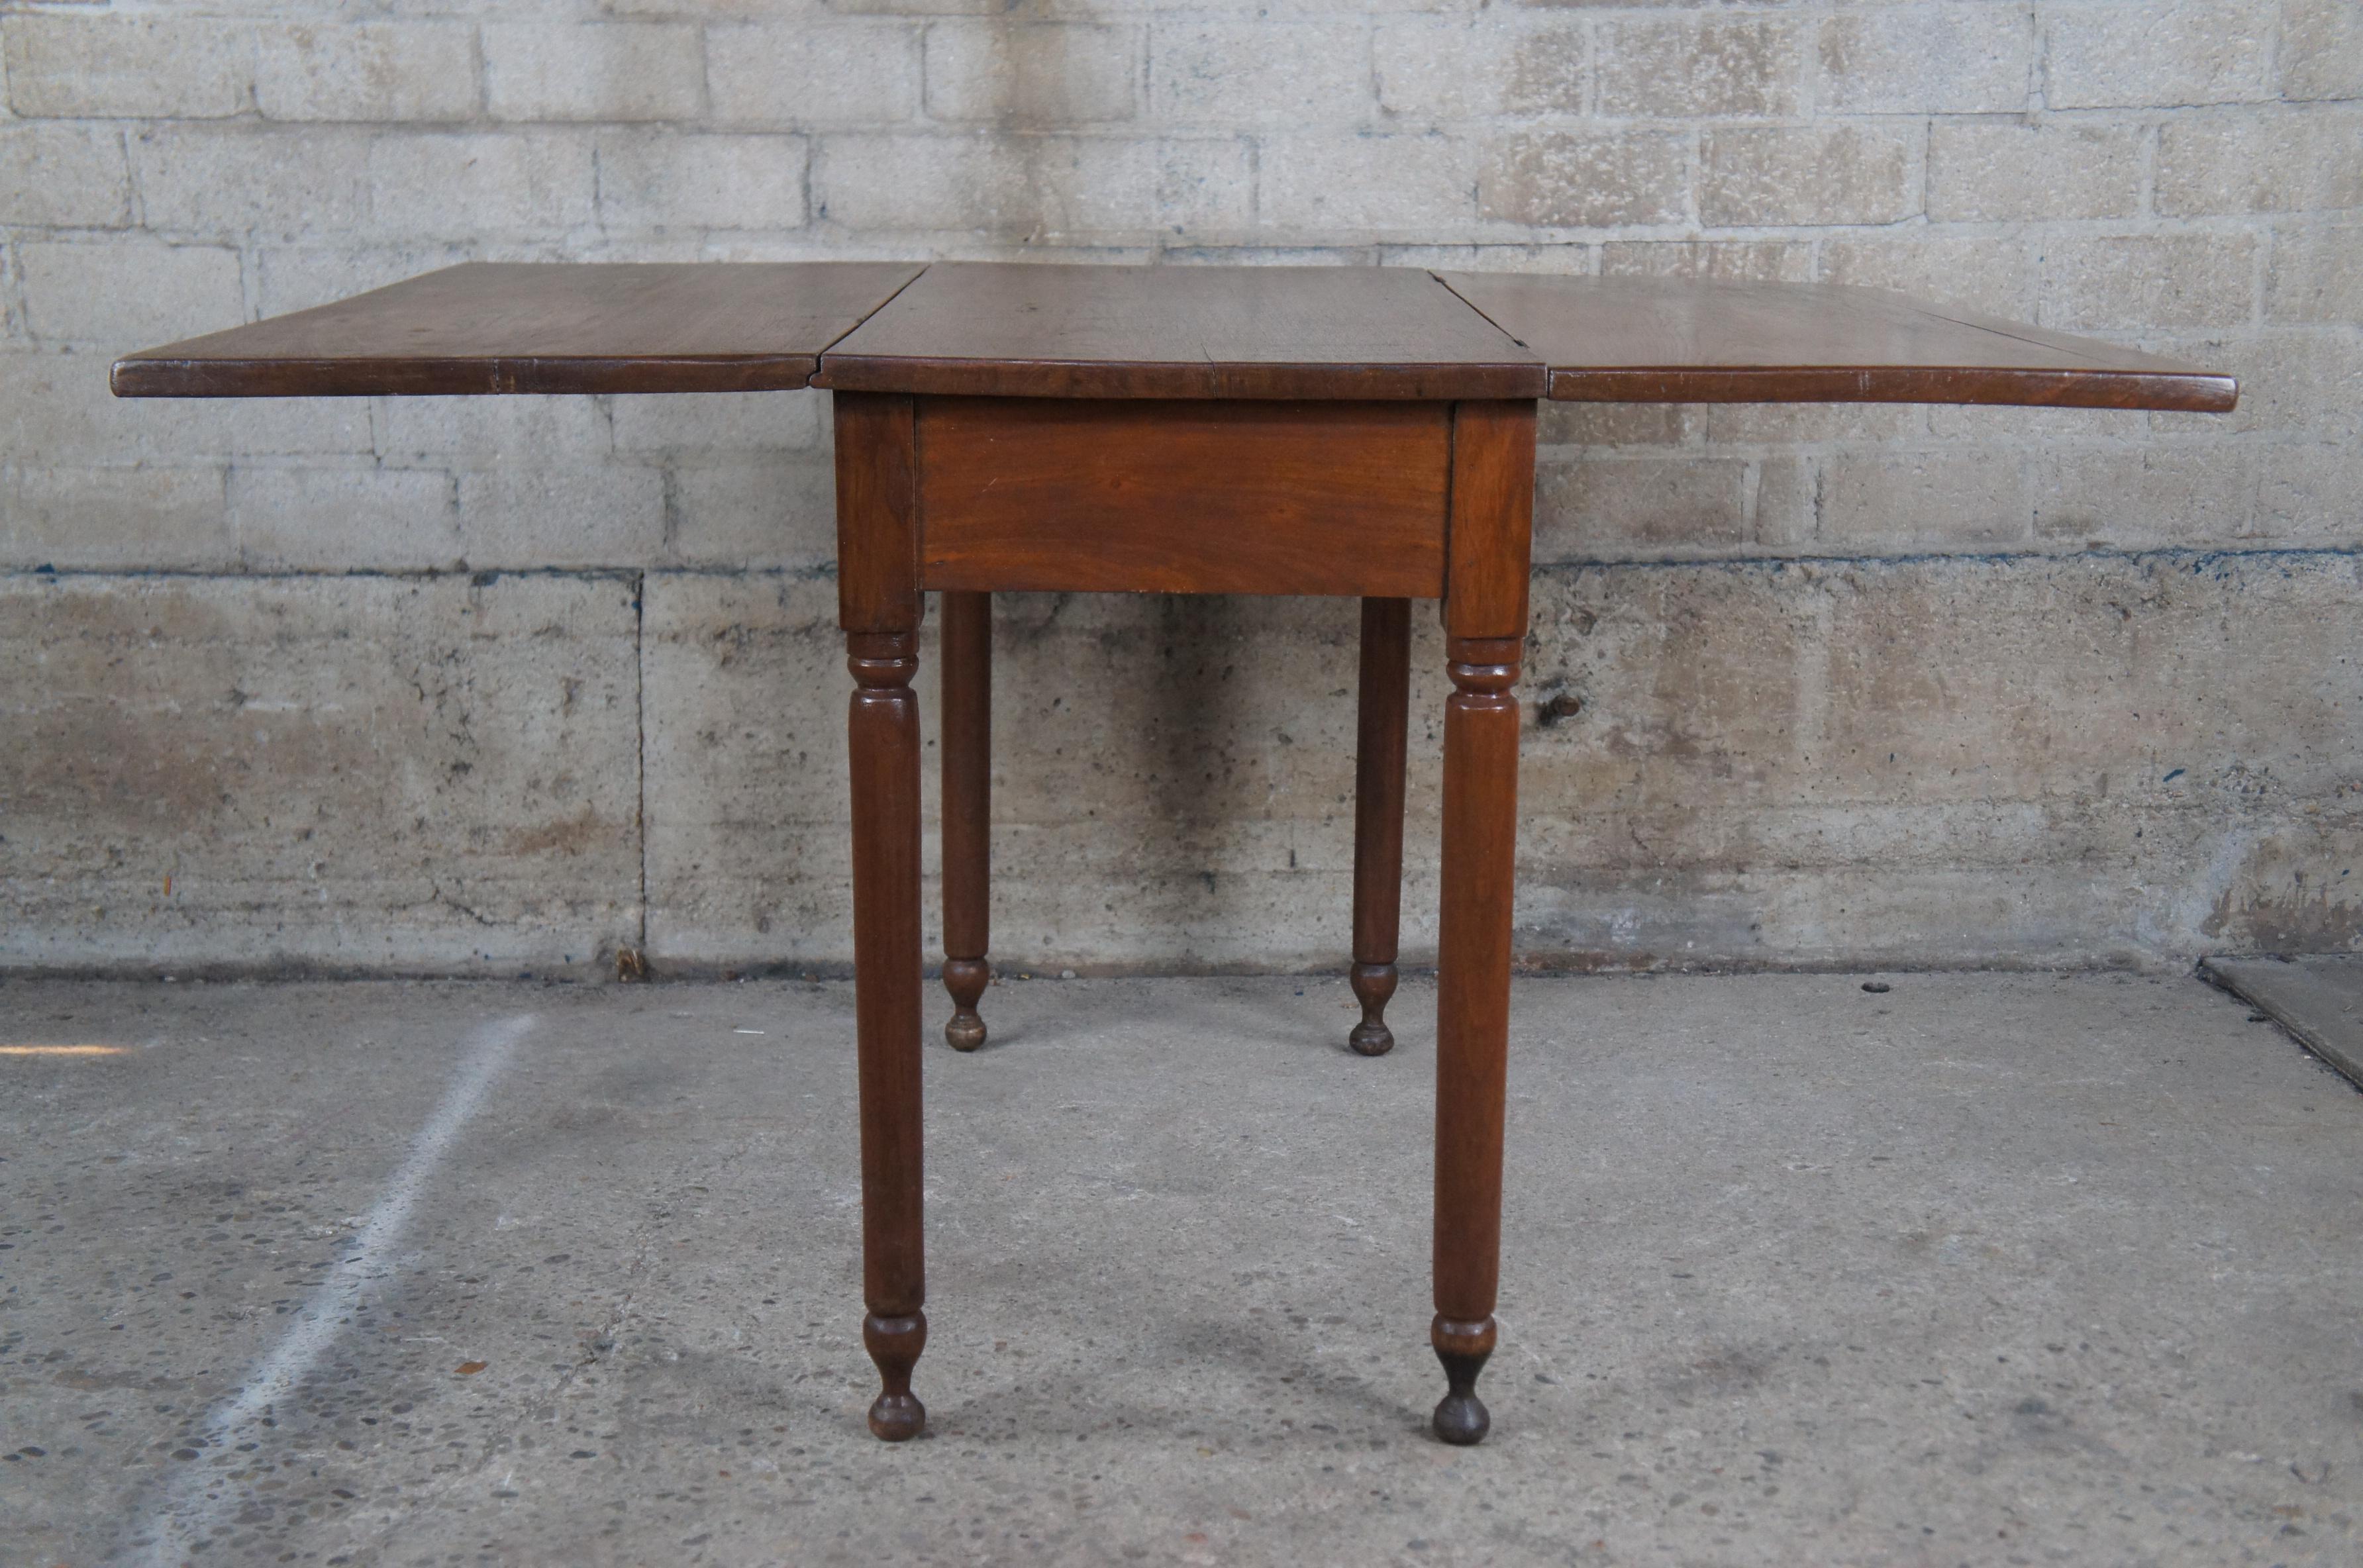 Antique Early American Walnut Drop Leaf Farmhouse Dining Table Entry Console 41